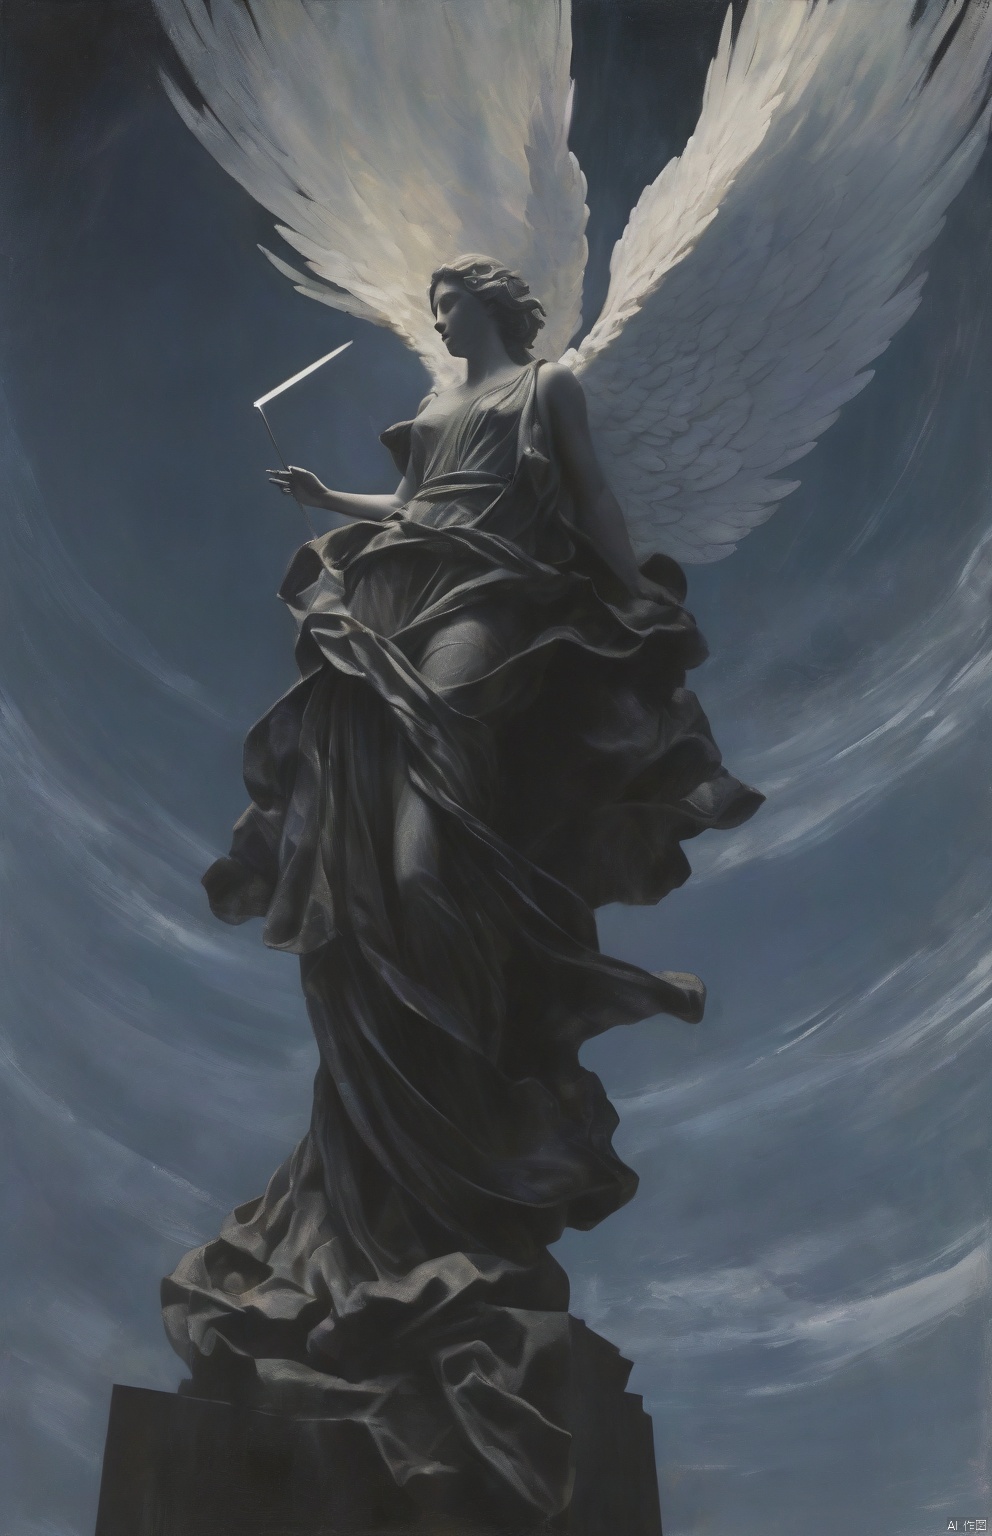  (Floating, colossal, futuristic angel in the sky:1.4),awe-inspiring and serene, in the style of Stuart Lippincott:2, with detailed composition and subtle geometric elements,This sanctuary-like atmosphere features crisp clarity and soft Colorful tones,creating a sense of scale and tension against the grandness of the statue.
The piece incorporates flowing draperies, reminiscent of Shwedoff and Philip McKay's styles, in the style of atmospheric photograms, （Colorful fluorescence：1.4）,trompe-I'ceil
illusionistic detail, fleeting brushstrokes, aerial view,(The quality of the movie is Kodak film,dark theme:1.3), surrealism, asymmetry,Shadow gradient,Overlook,Sculpture,The best light,High contrast, European classicism,line art,ivan shshkin, blue_streaked_hair, ussrart